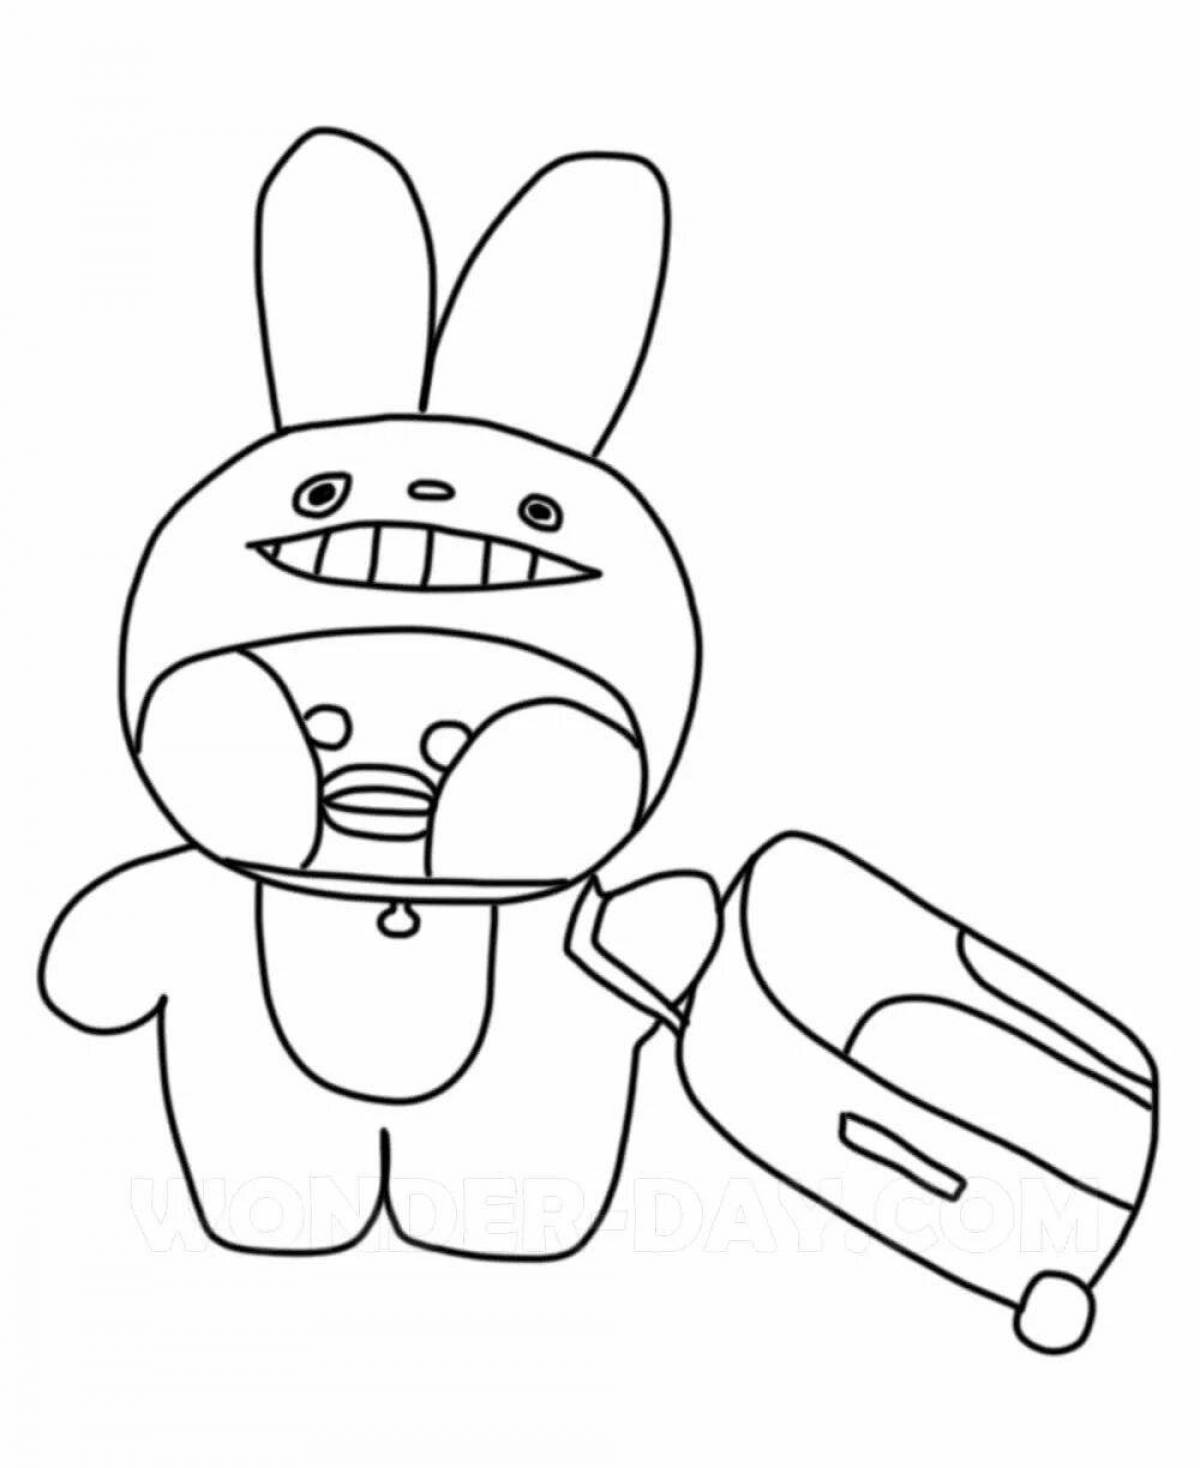 Dazzling duck coloring page from tik tok